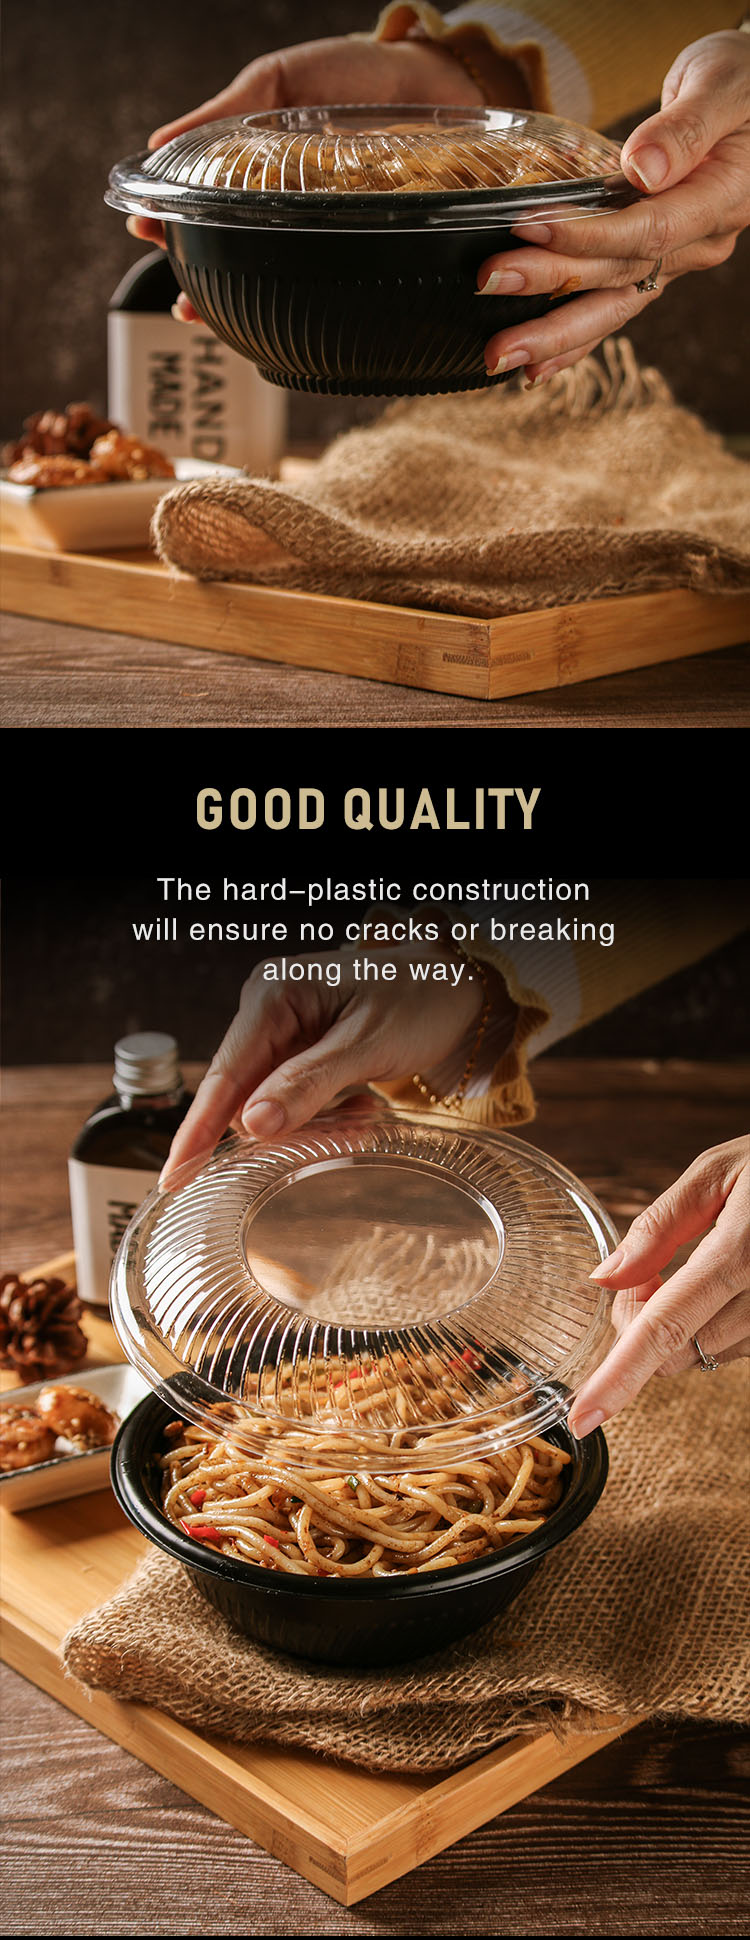 Good Quality The hard-plastic construction will ensure no cracks or breaking along the way